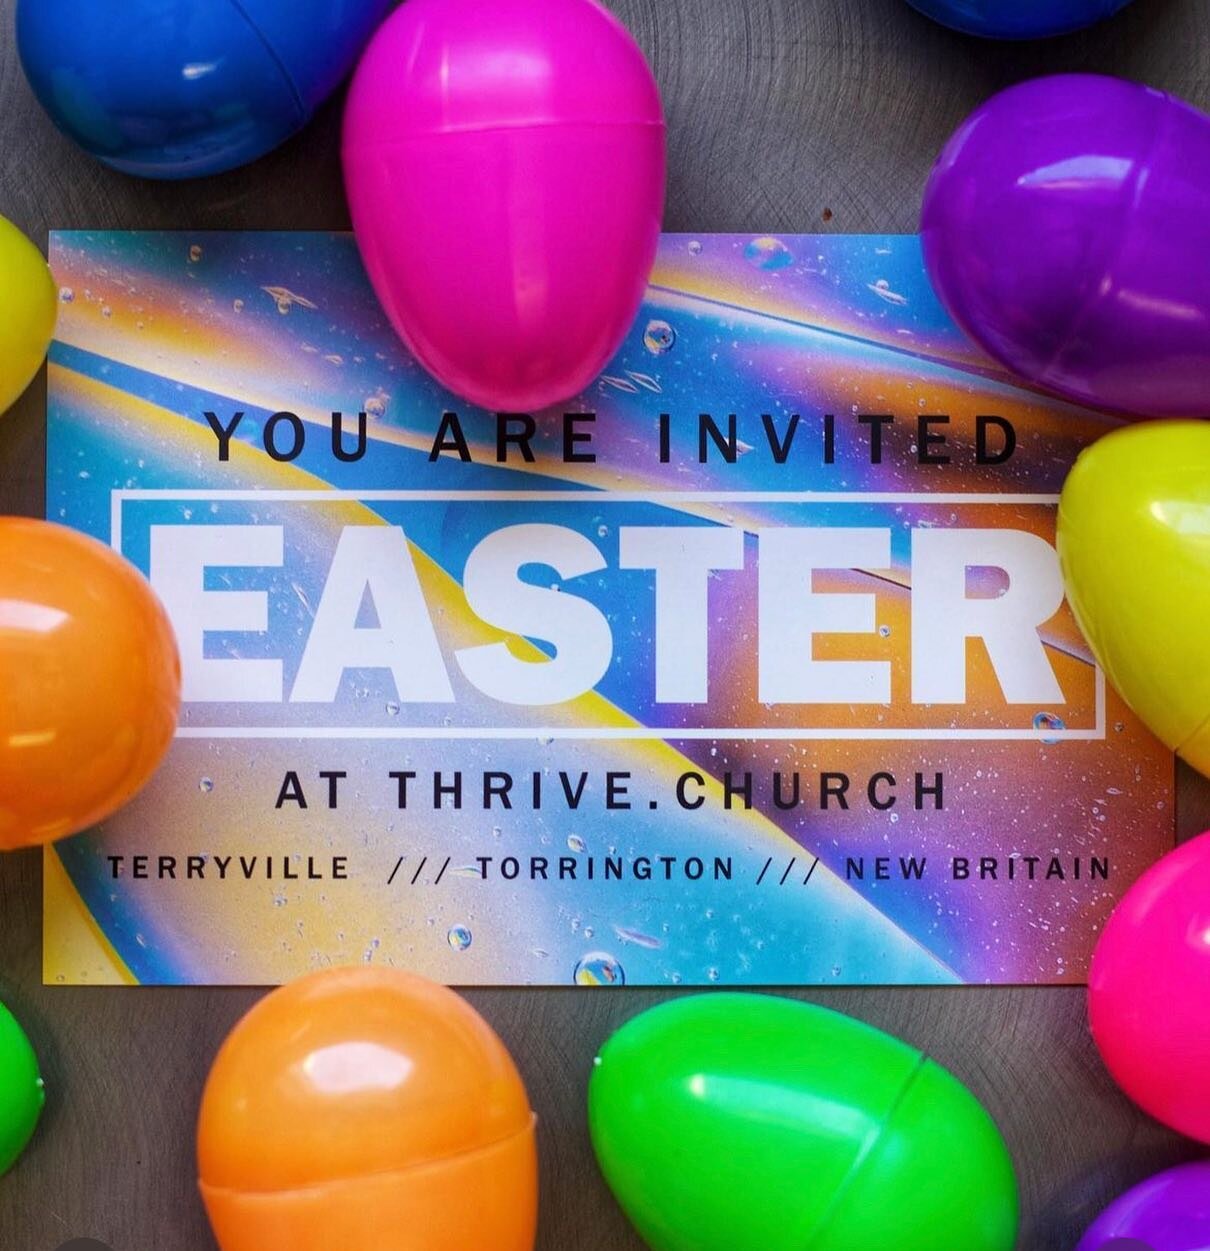 Come celebrate with us!! This is your personal invitation! We can&rsquo;t wait to worship our savior together! 
.
.
Terryville - Sunday, 8:30 10 &amp; 11:30am
.
.
Torrington - Sunday, 10am 
.
.
New Britain - Sunday, 10am